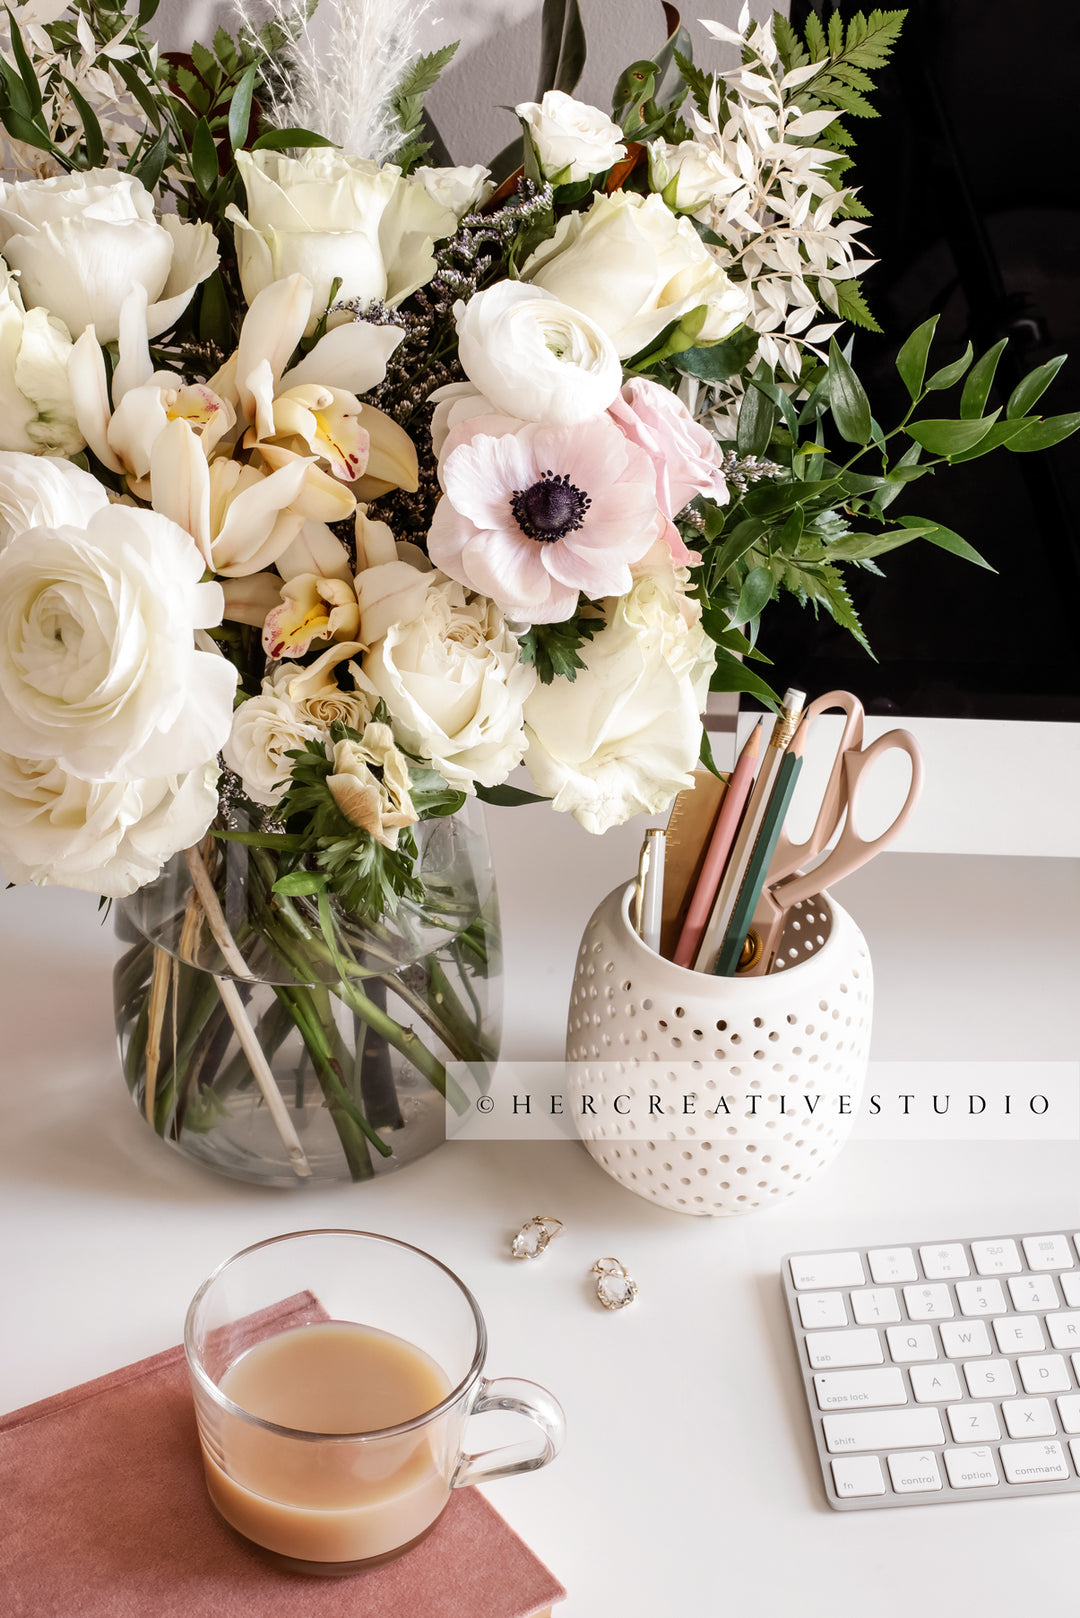 Flowers, Coffee & Pencil Holder on Pretty Workspace, Styled Stock Image